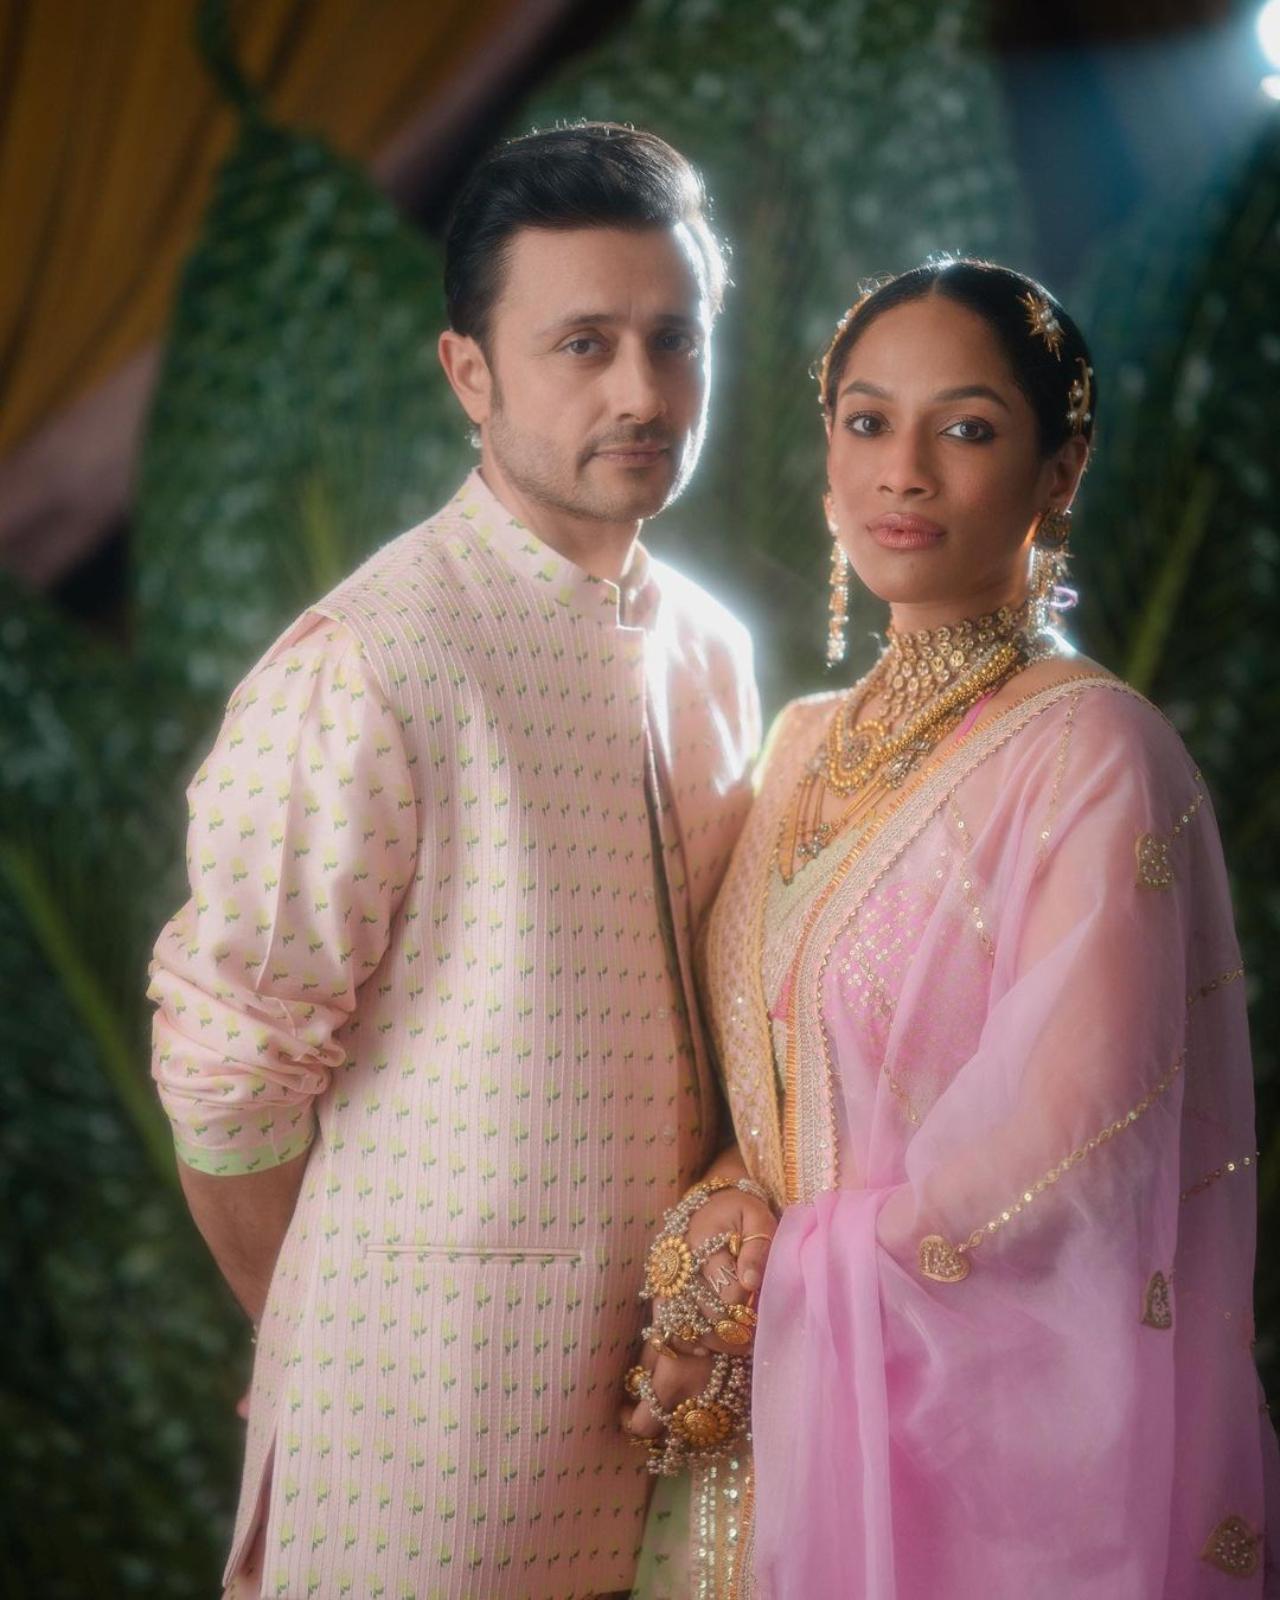 Masaba and Satyadeep met on the sets of the Netflix show 'Masaba Masaba' which is based on the life of the designer. Satyadeep essayed the role of Masaba's ex-husband on the show